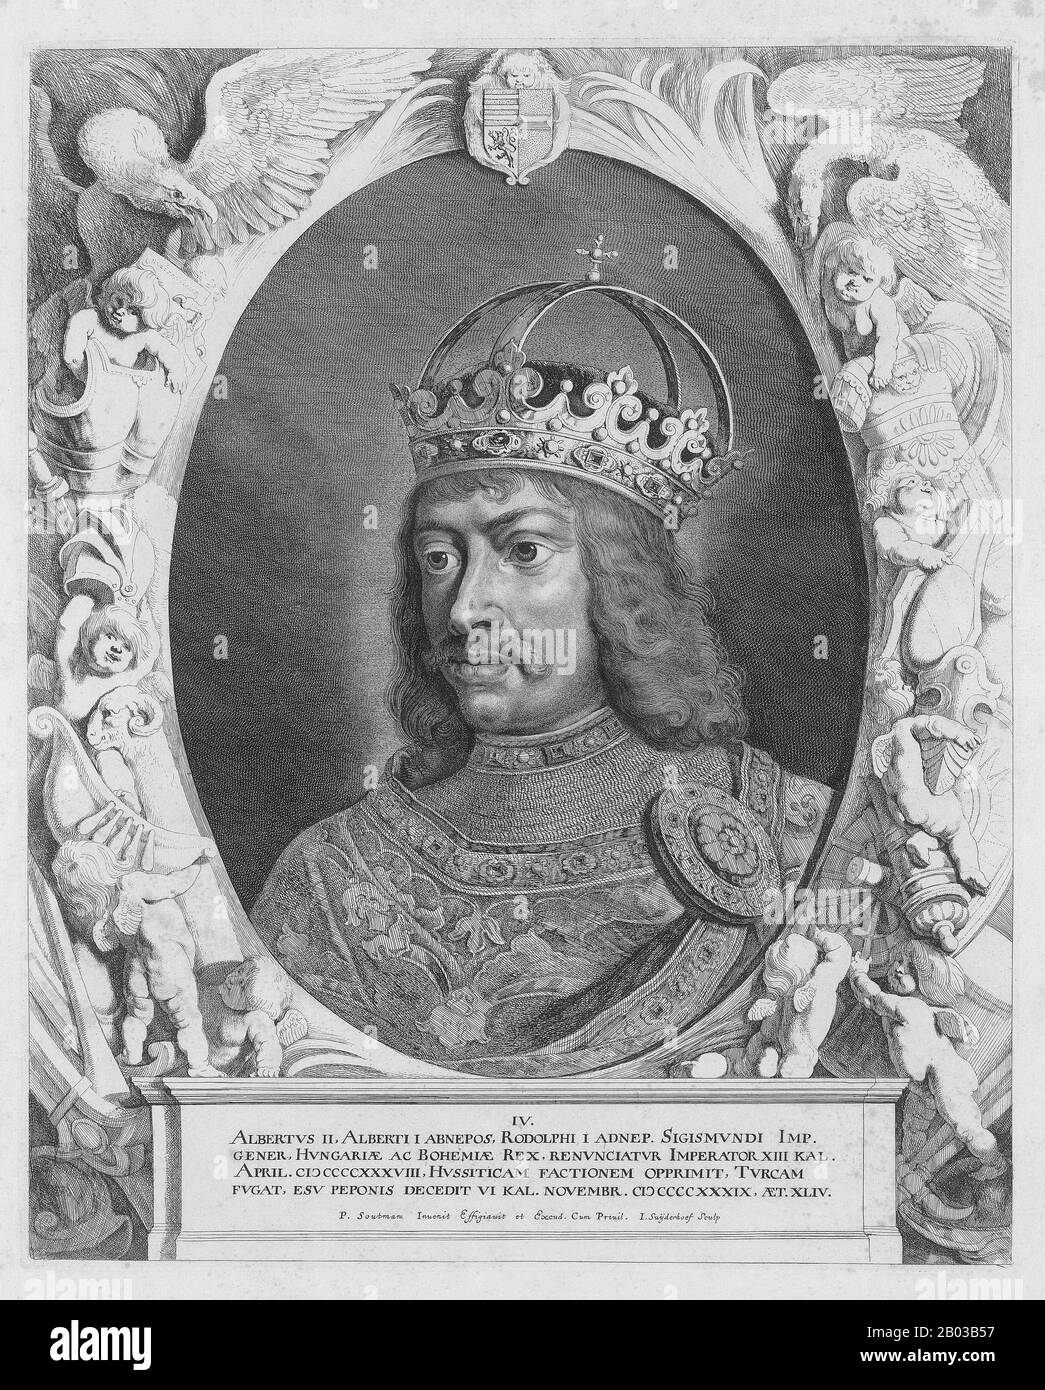 Albert II (1397-1439), also known as Albert of Germany and Albert the Magnanimous, was the son of Albert IV, Duke of Austria, succeeding his father at the age of seven in 1404, though he did not become the proper governor of Austria until 1411. Albert married Elisabeth of Luxembourg, heiress of Emperor Sigismund, in 1422. The crown of Germany was given to him in 1438. Stock Photo